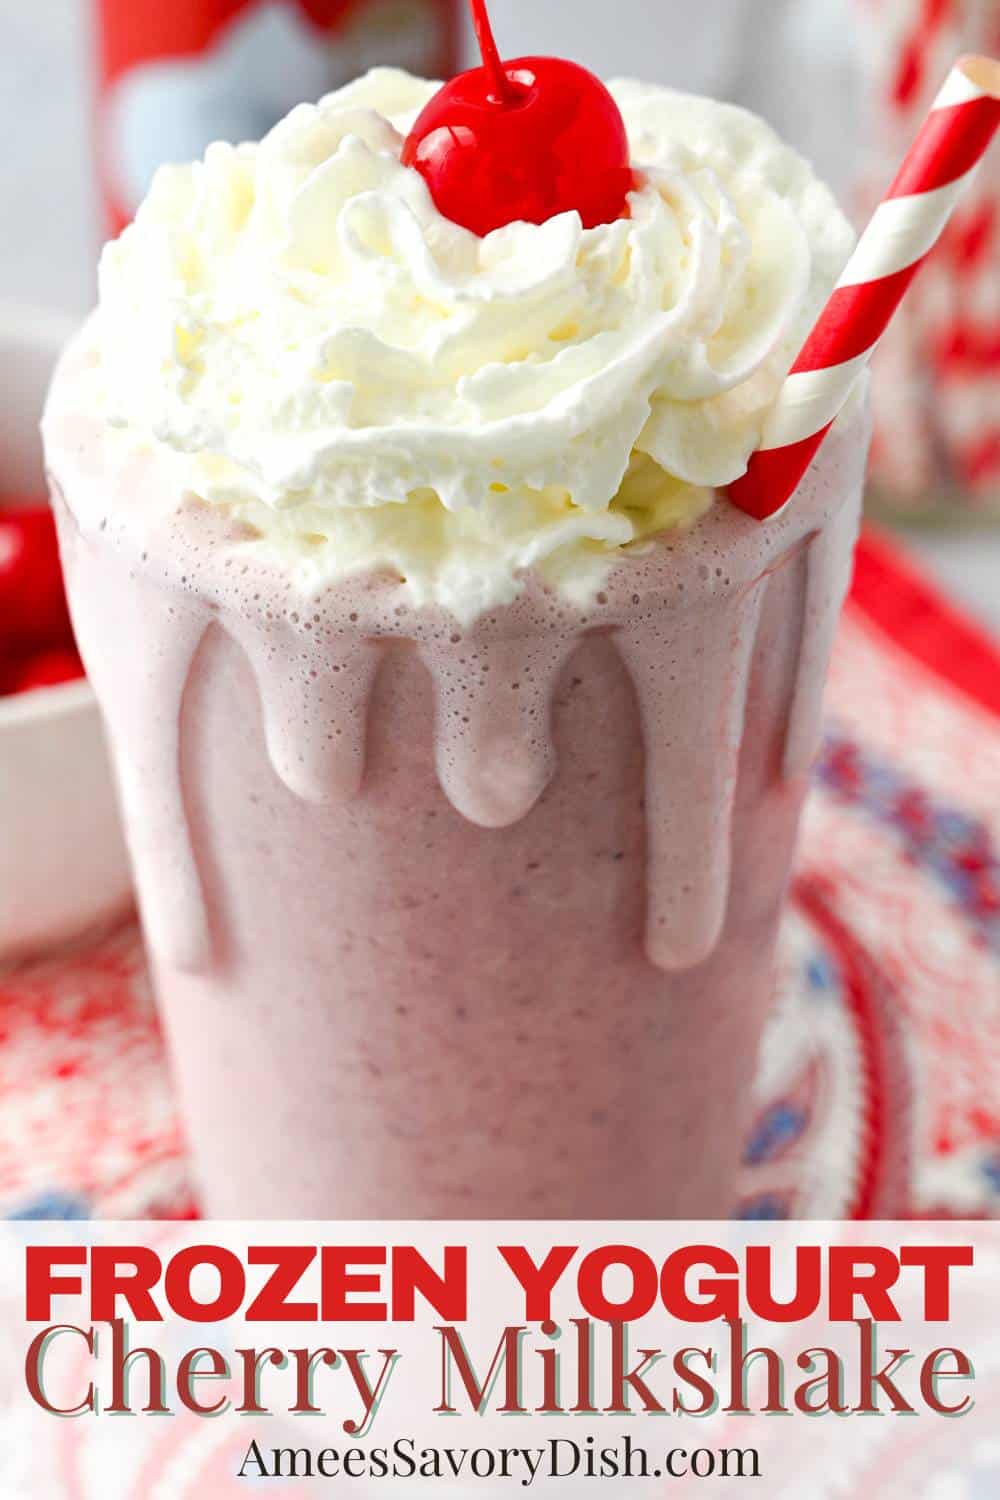 Made with frozen cherries, vanilla frozen yogurt, and milk, this shake is guaranteed to satisfy your craving for something sweet! High protein option included. via @Ameessavorydish